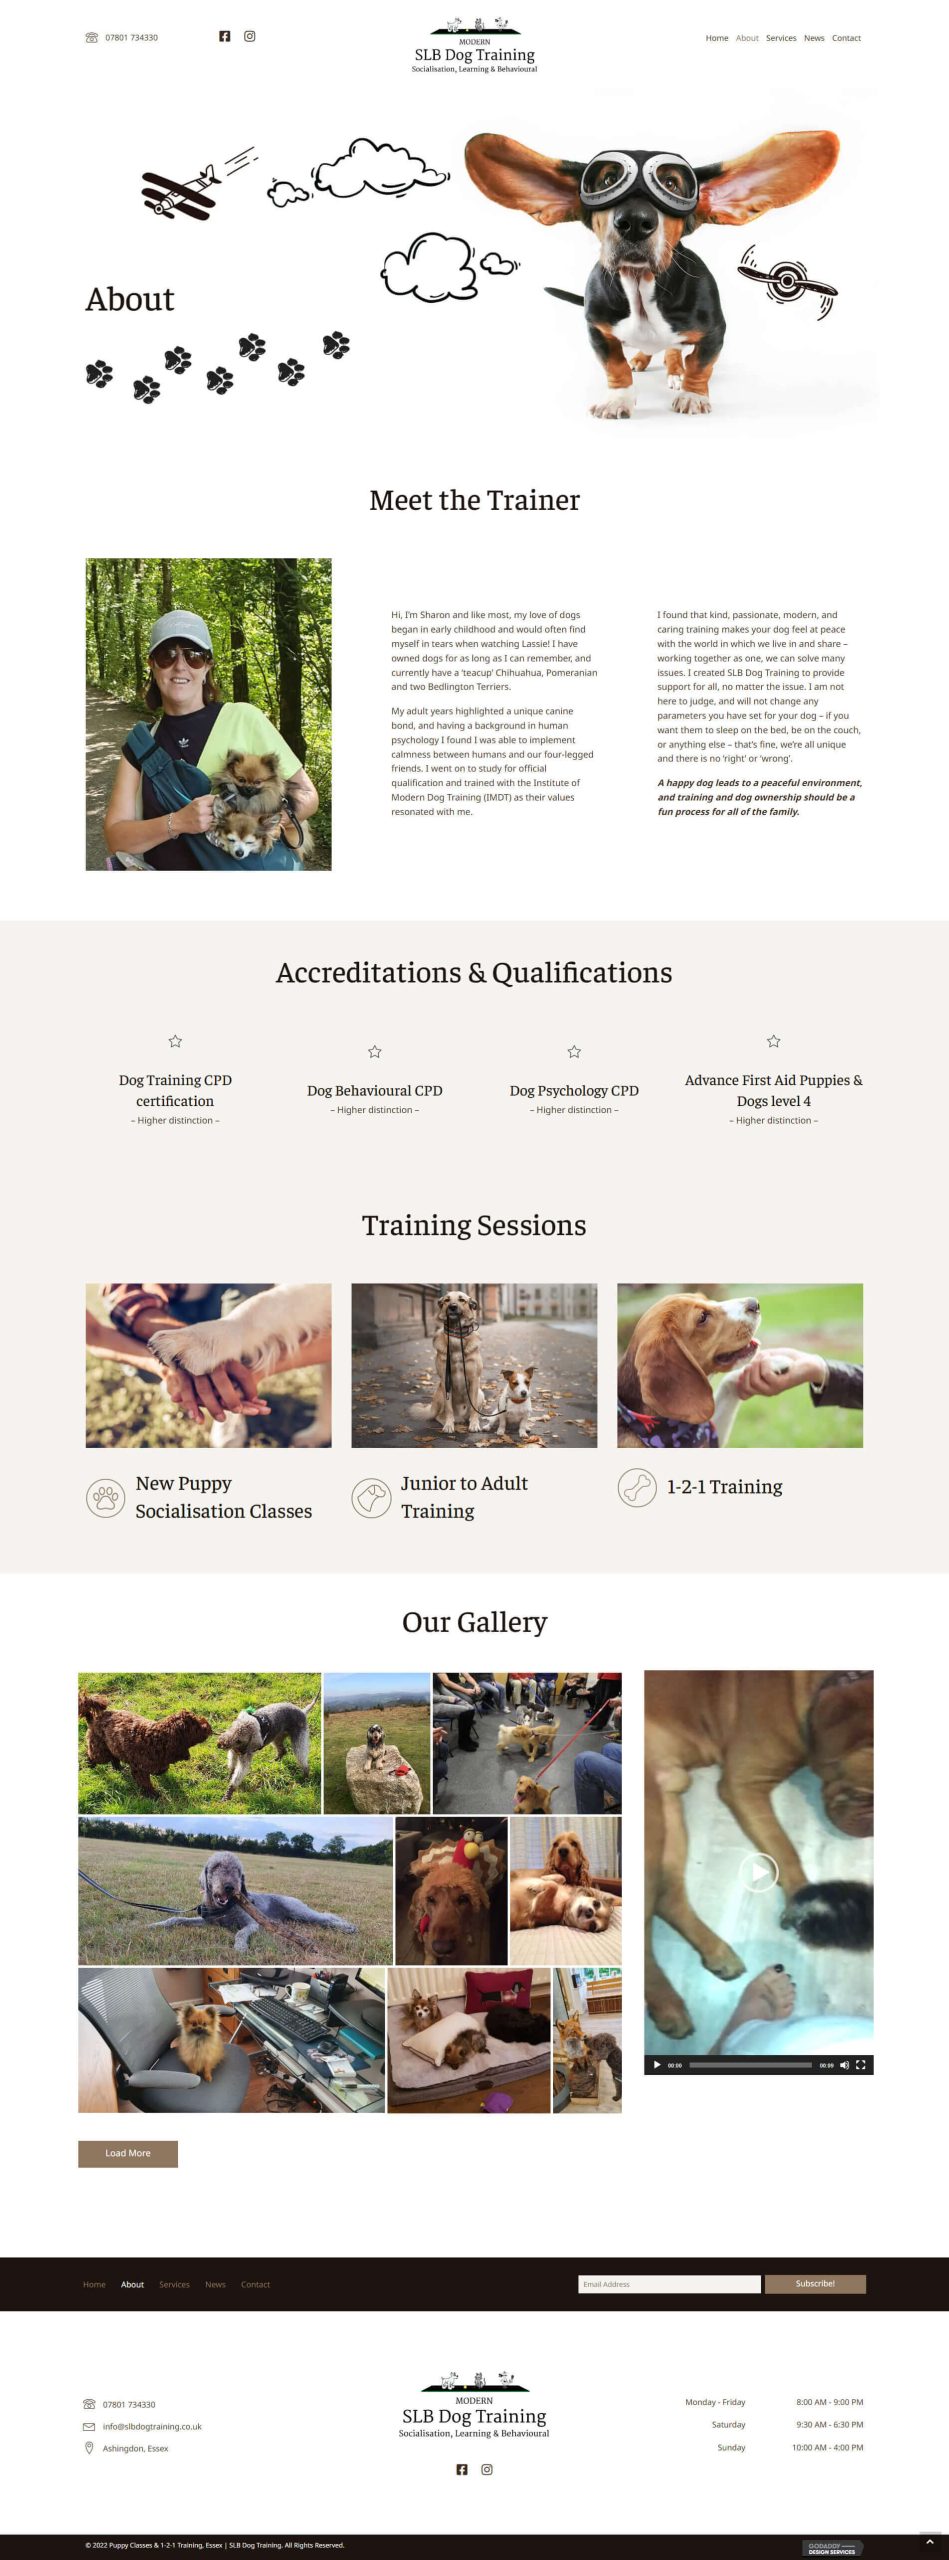 SLB-Dog-Training-about-page-desktop